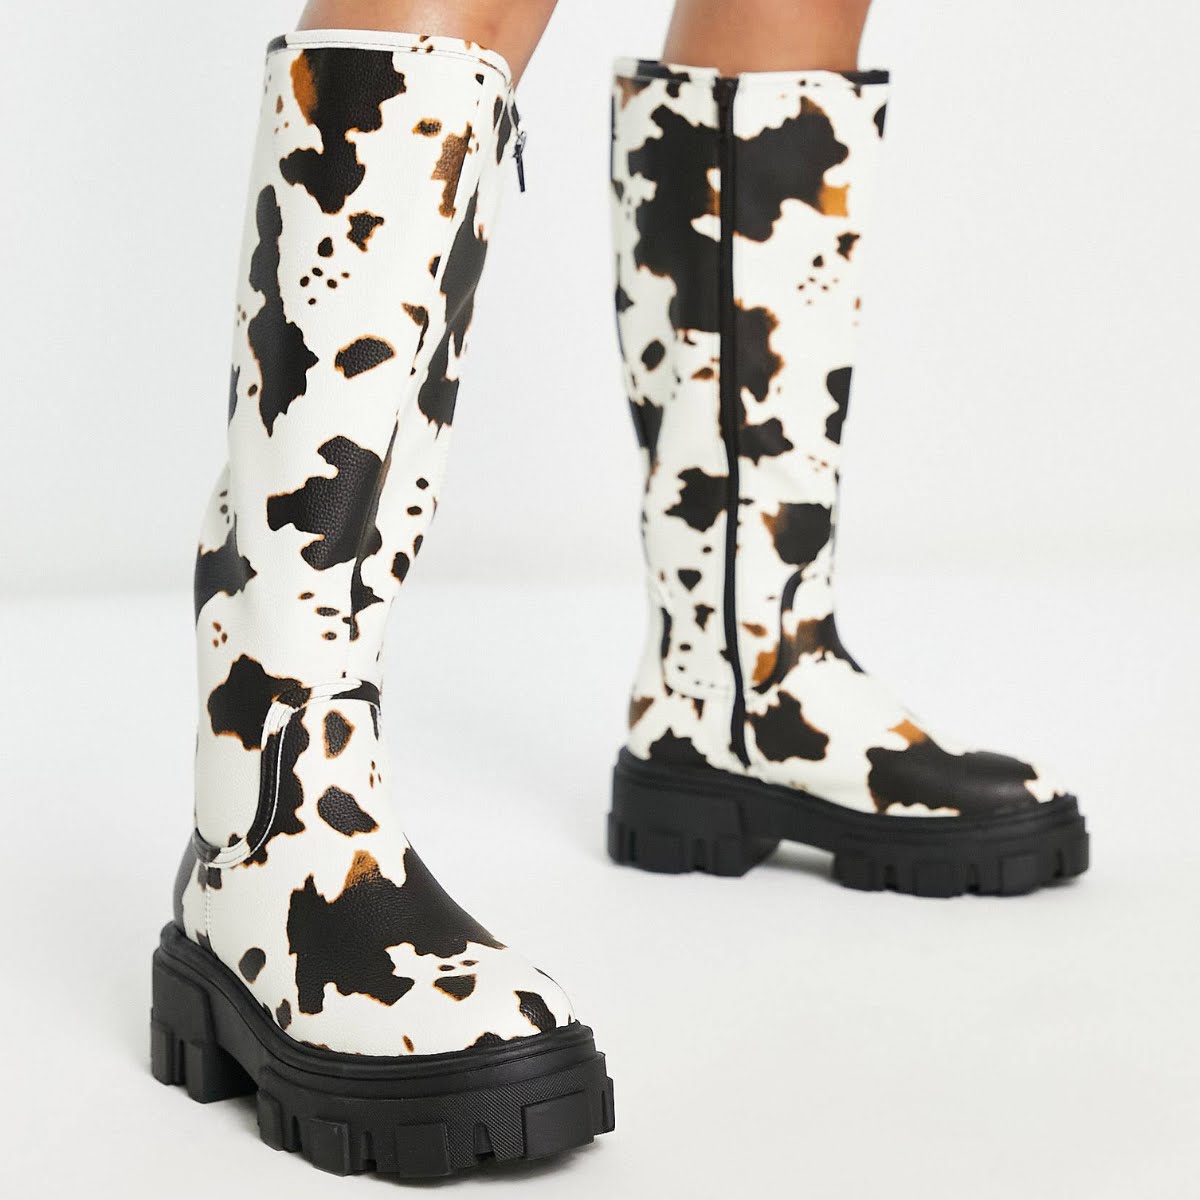 Carla Chunky Flat Knee Boots in Cow Print, €36.59